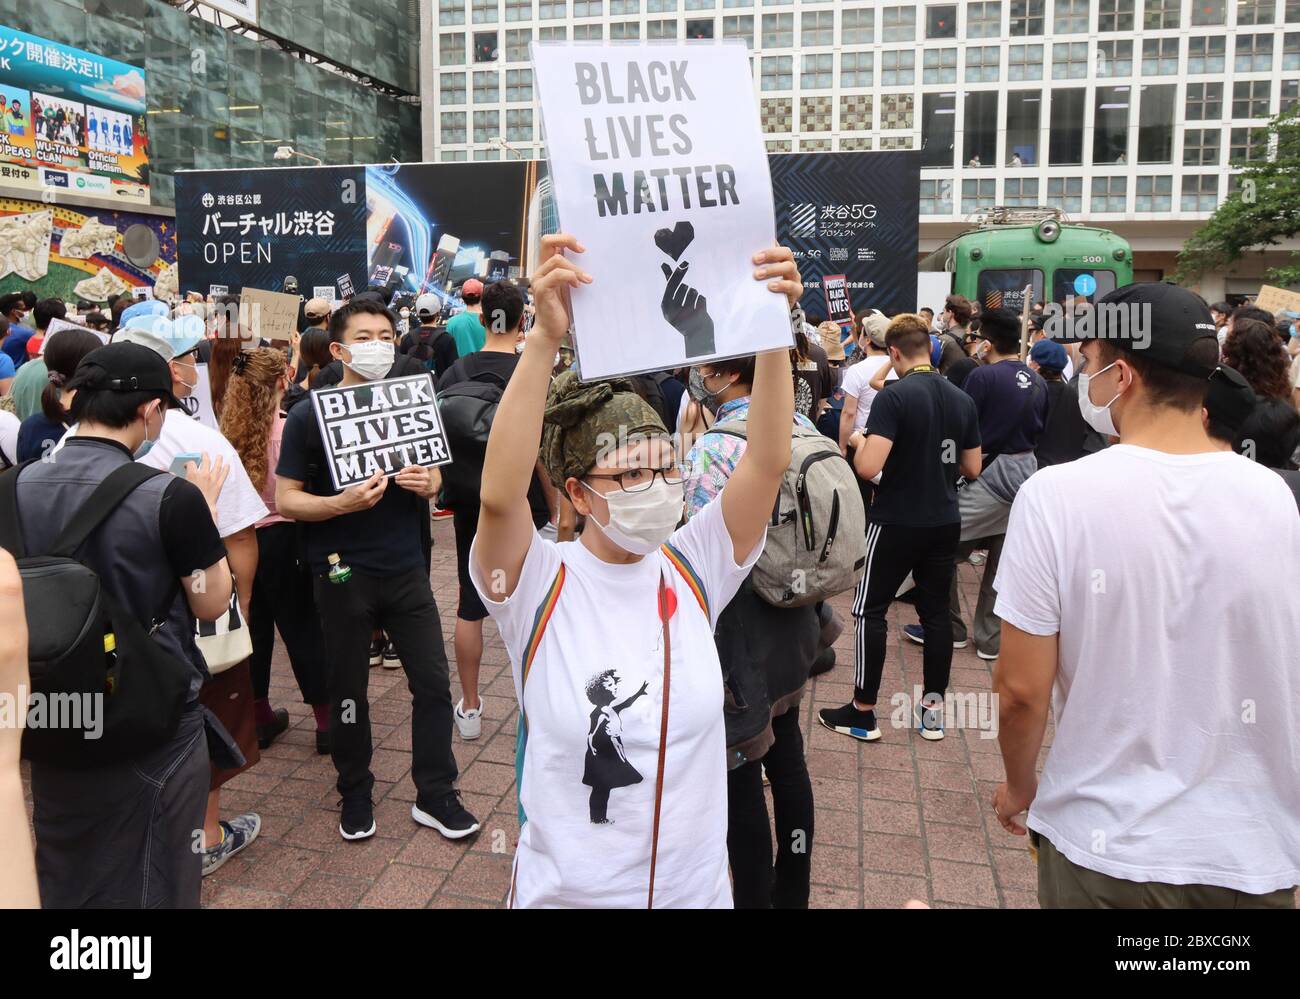 Tokyo, Japan. 6th June, 2020. Protestors raising cards hold a rally against racism and violence by police in Tokyo's Shibuya district on Saturday, June 6, 2020. Some hundreds of people gather for Black Lives Matter as black man George Floyd killed by police in Minneapolis and police's violence to Kurdish man in Shibuya. Credit: Yoshio Tsunoda/AFLO/Alamy Live News Stock Photo